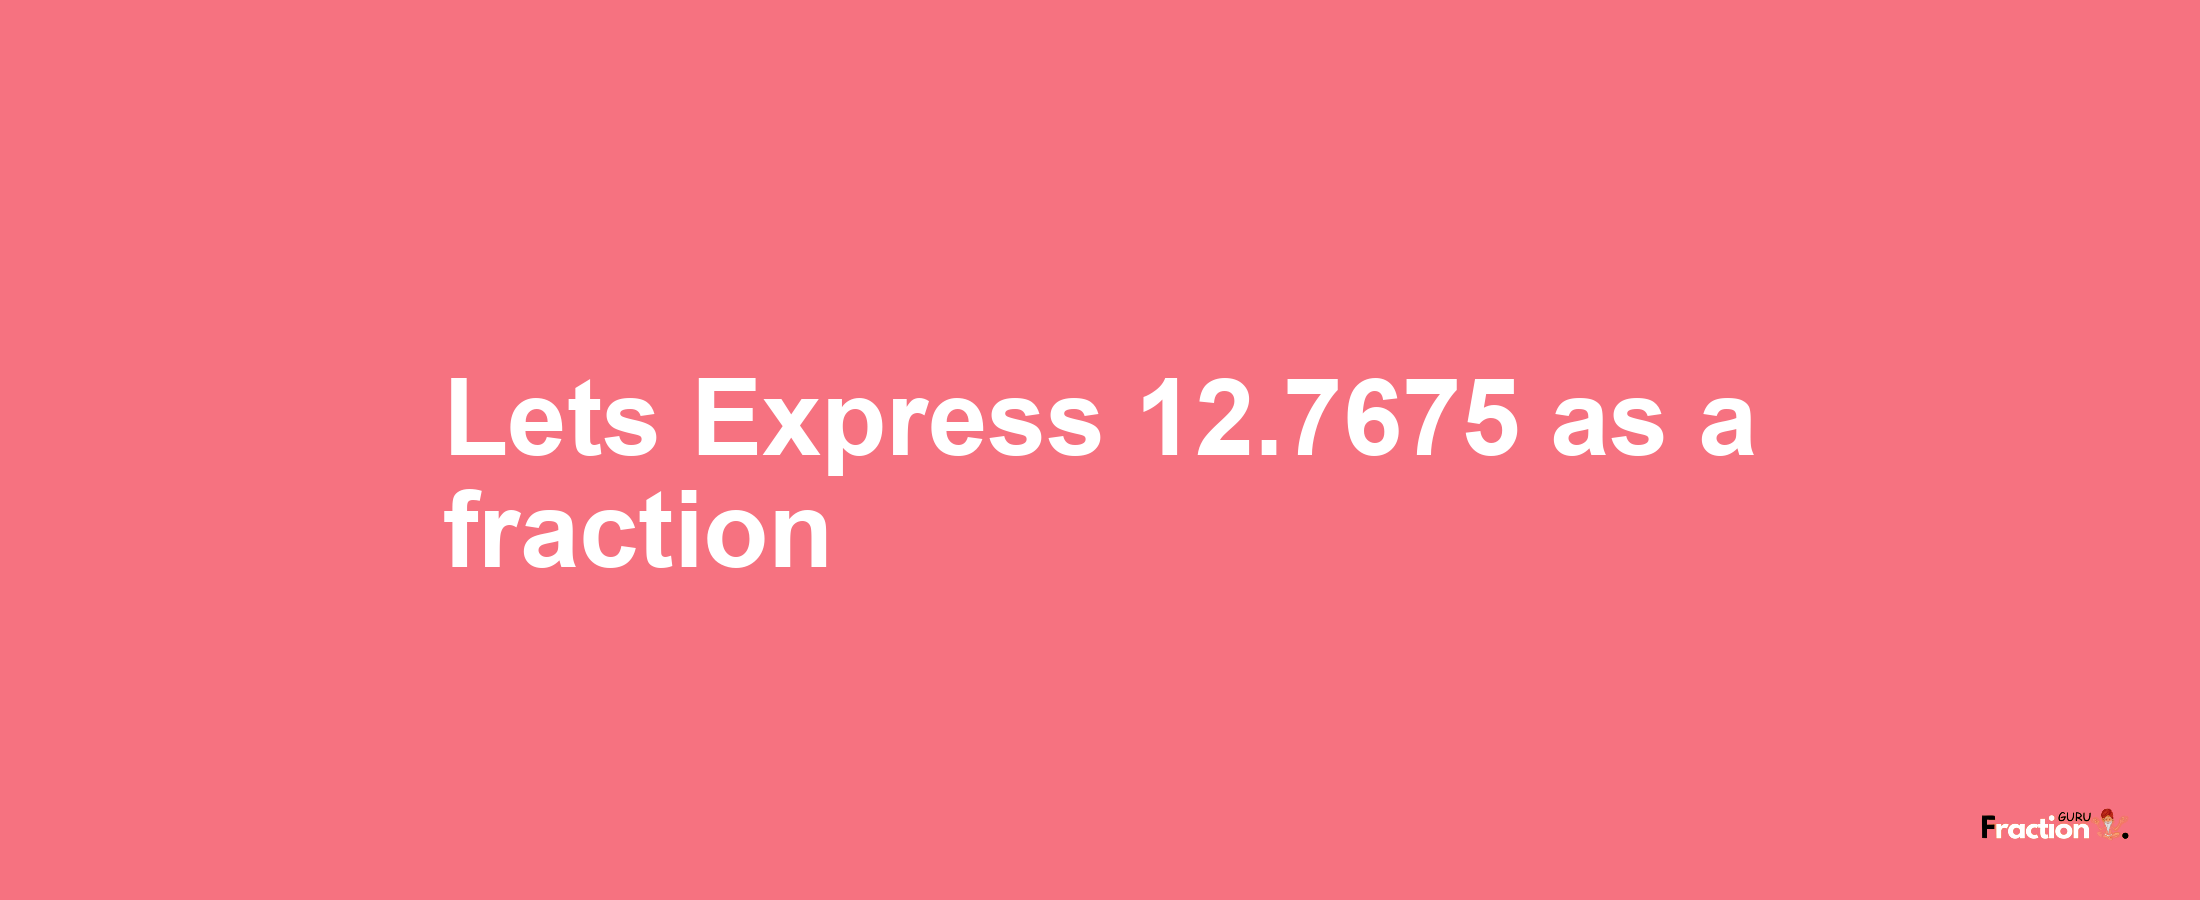 Lets Express 12.7675 as afraction